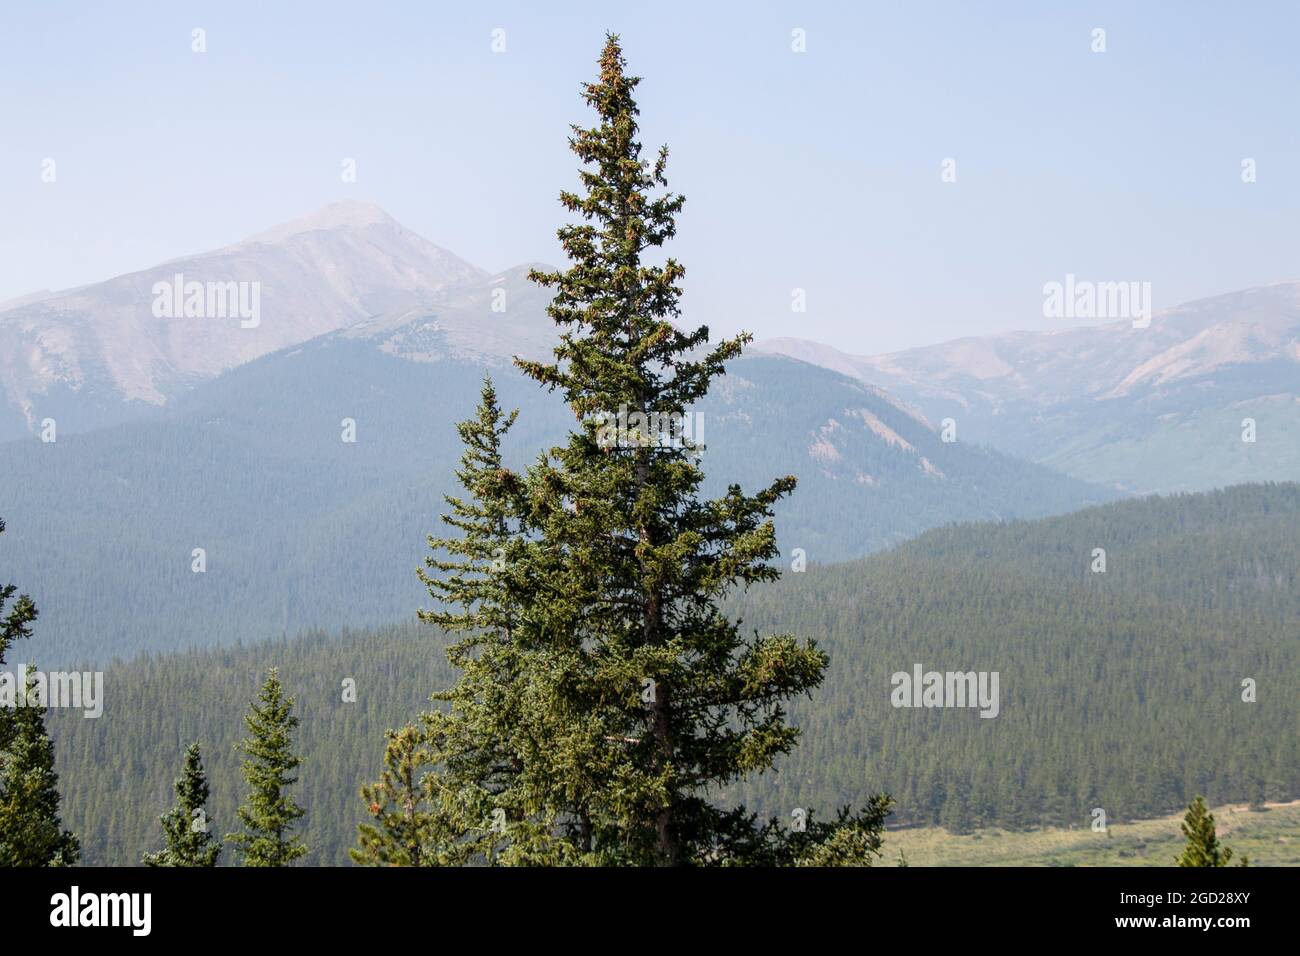 Tall Tree growing in Front of Mountains Stock Photo